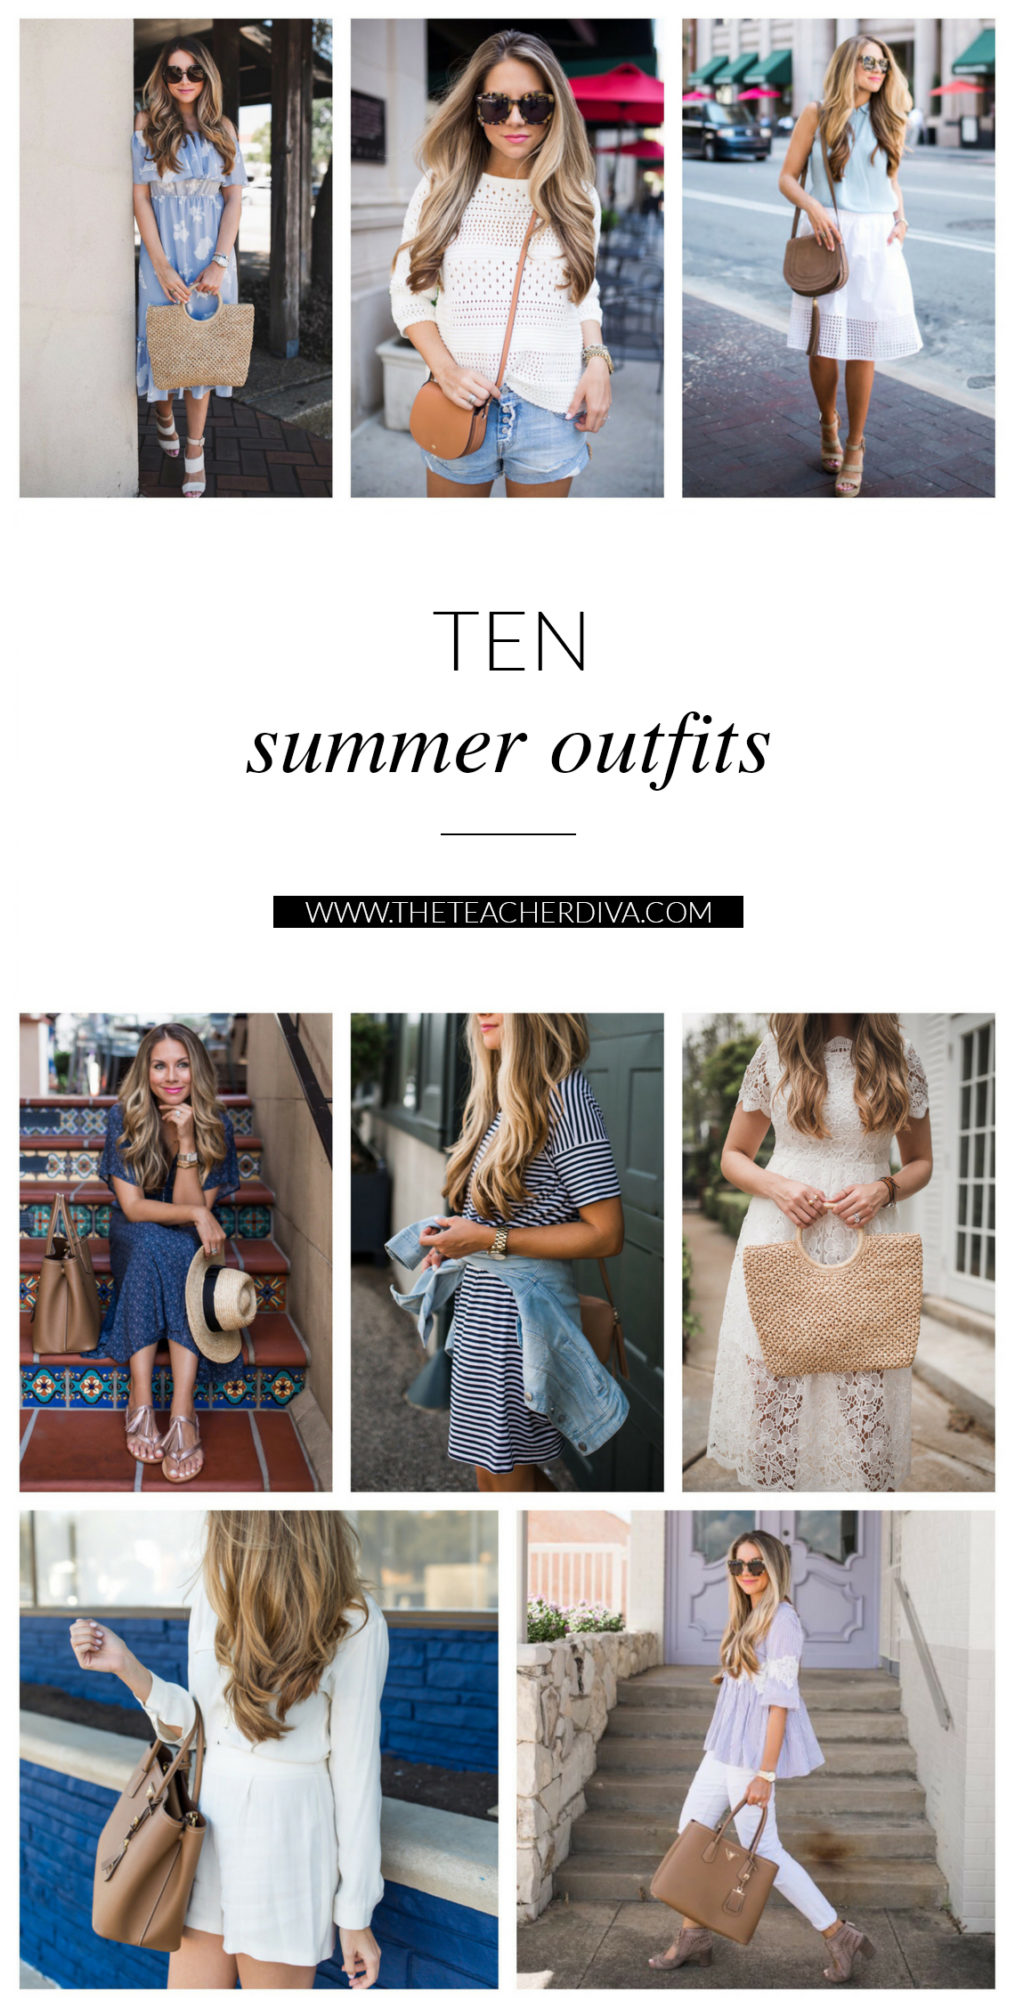 What are you wearing, Hun? xx  Classy summer outfits, Chic summer dresses, Summer  fashion